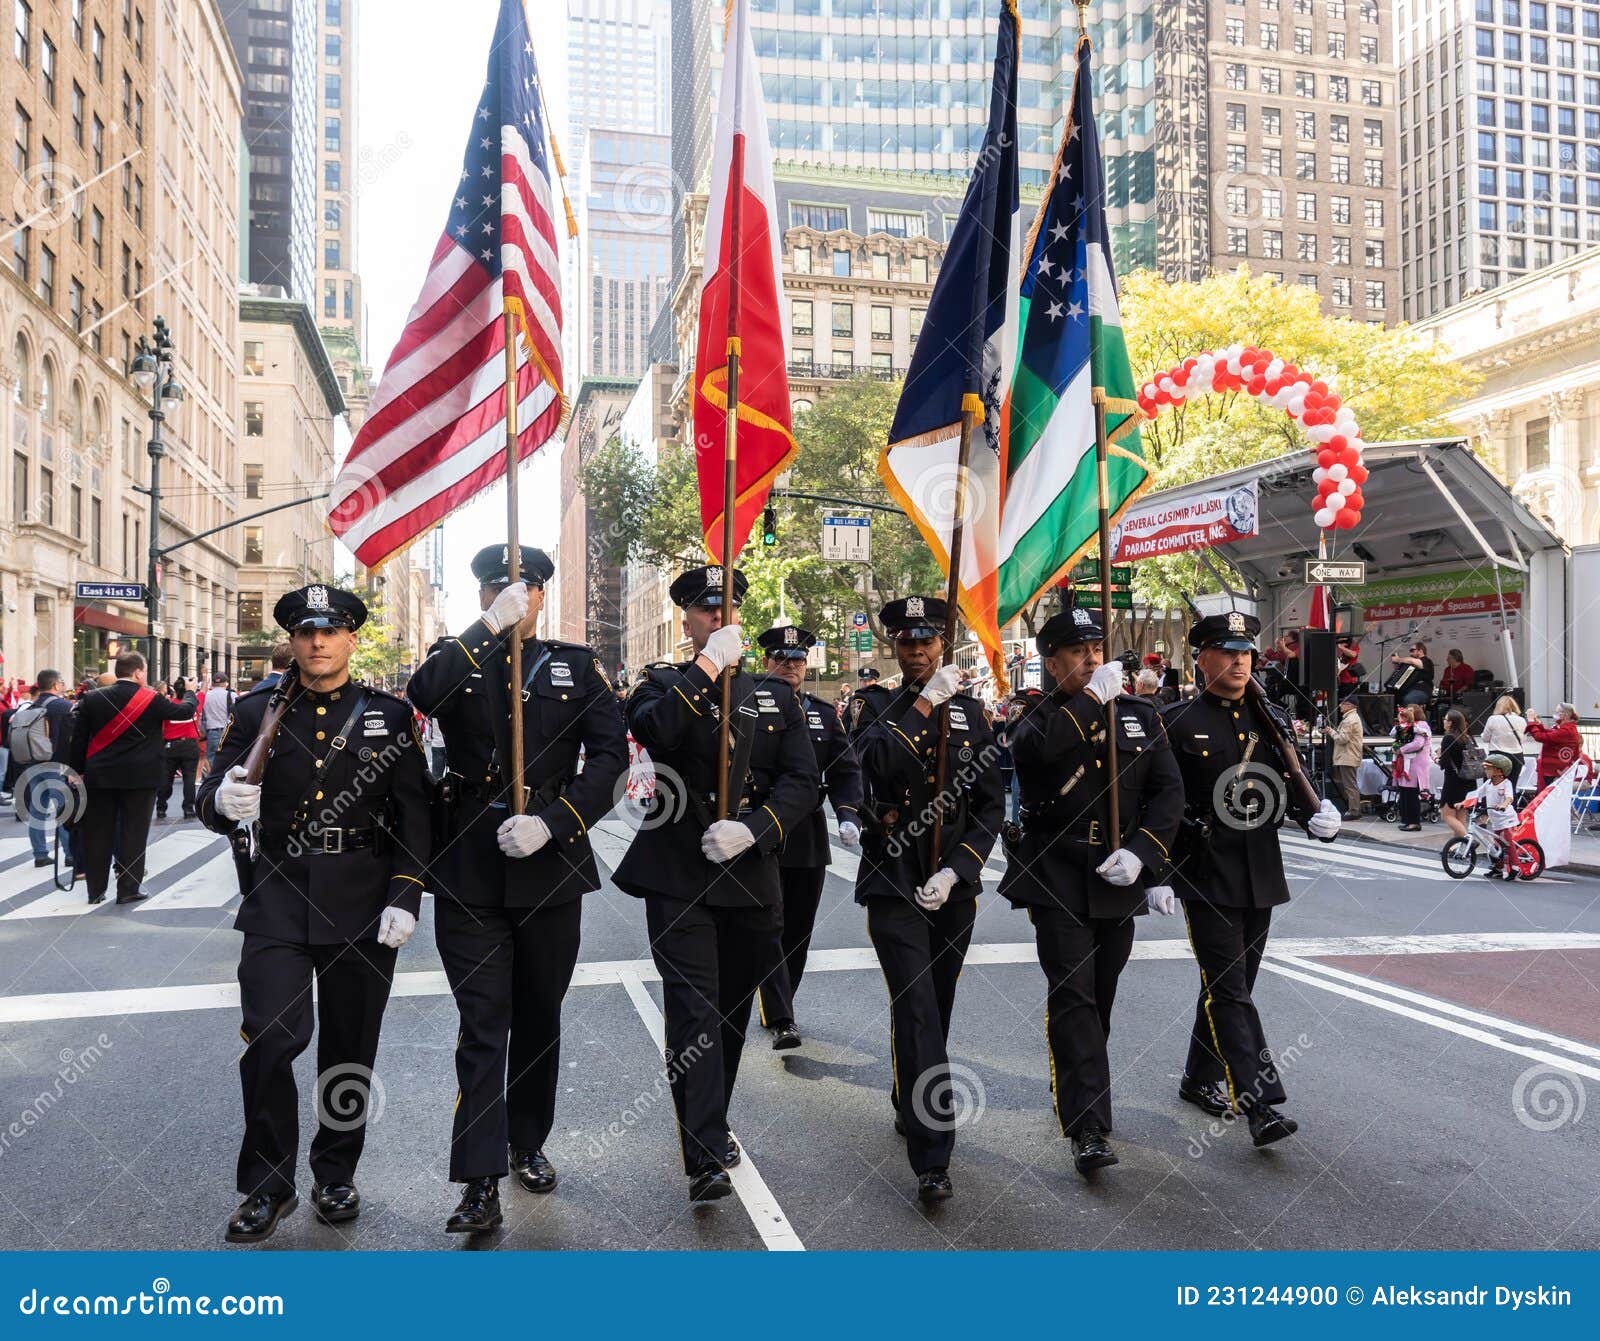 84th Annual Kazimierz Pulaski Day Parade on 5th Ave at New York City